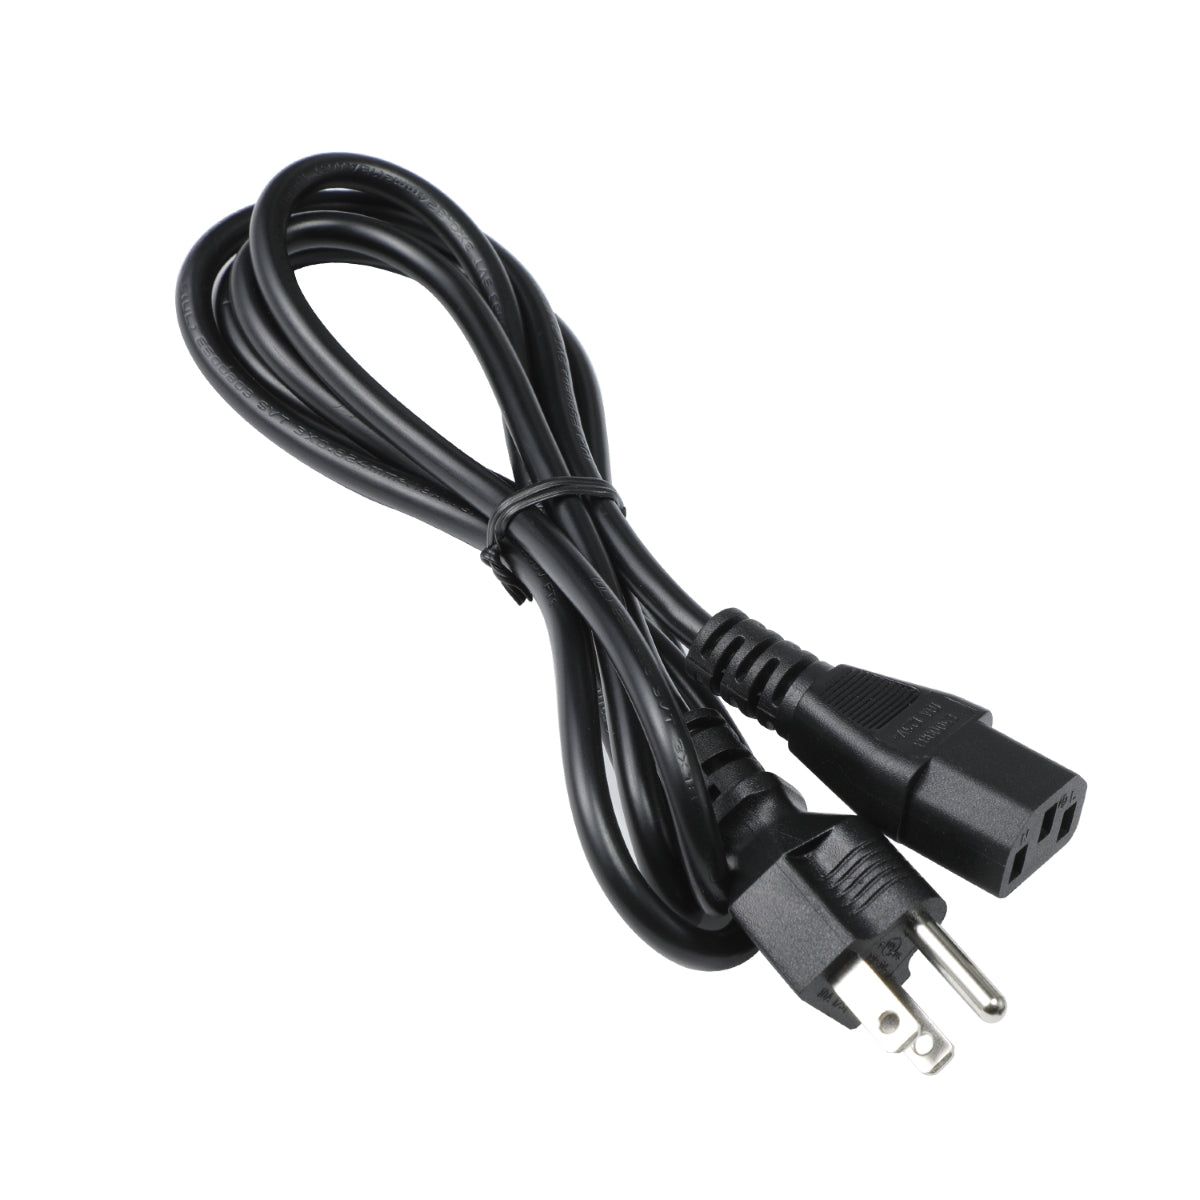 Power Cord for ViewSonic VP2468 Display Monitor